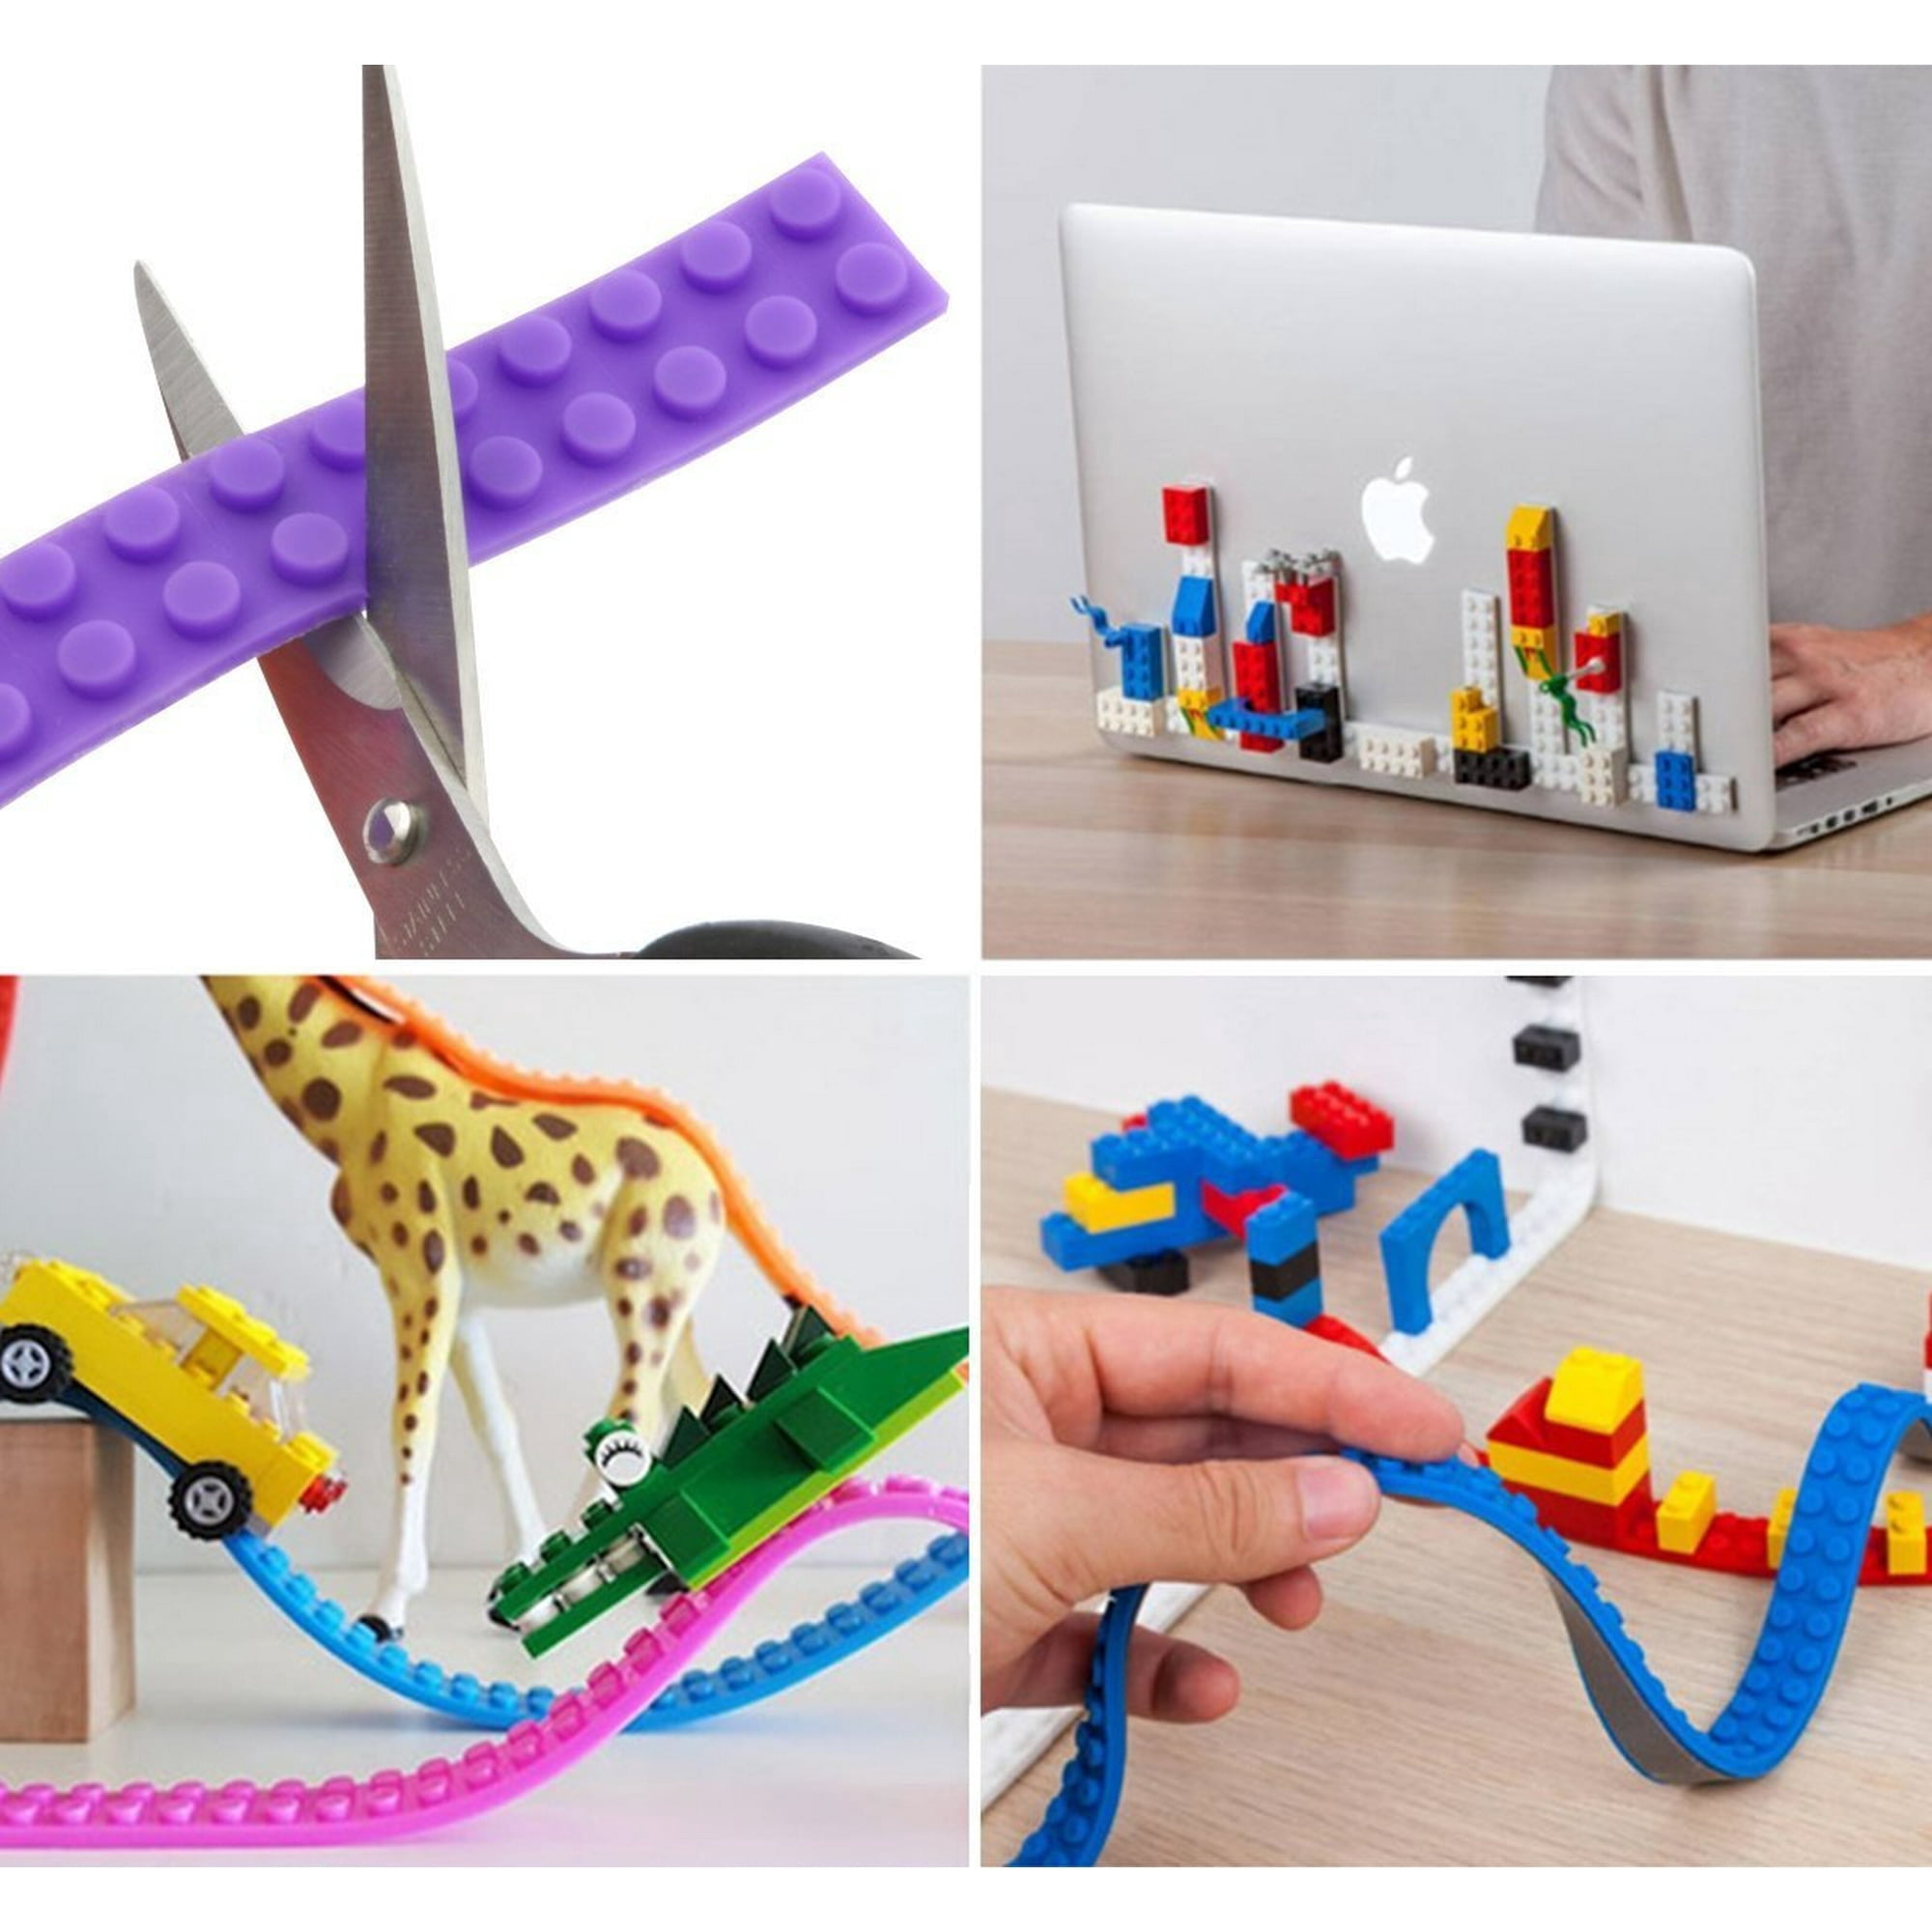 Flexible & Adhesive LEGO TAPE Could Be Useful for Makers / DIY Projects -  CNX Software